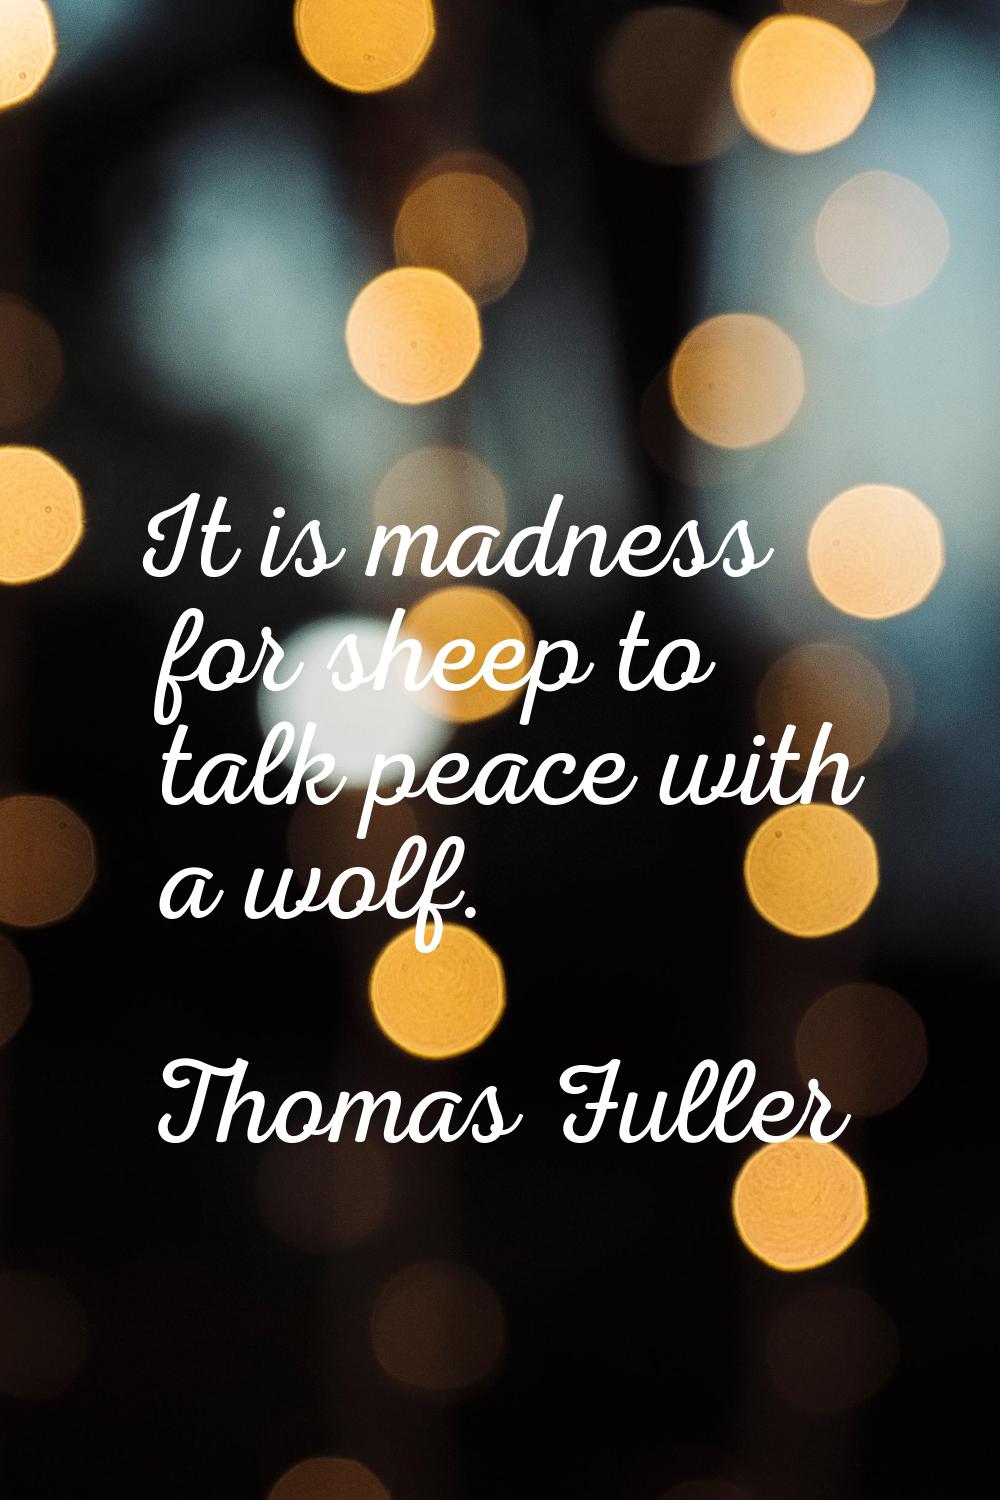 It is madness for sheep to talk peace with a wolf.